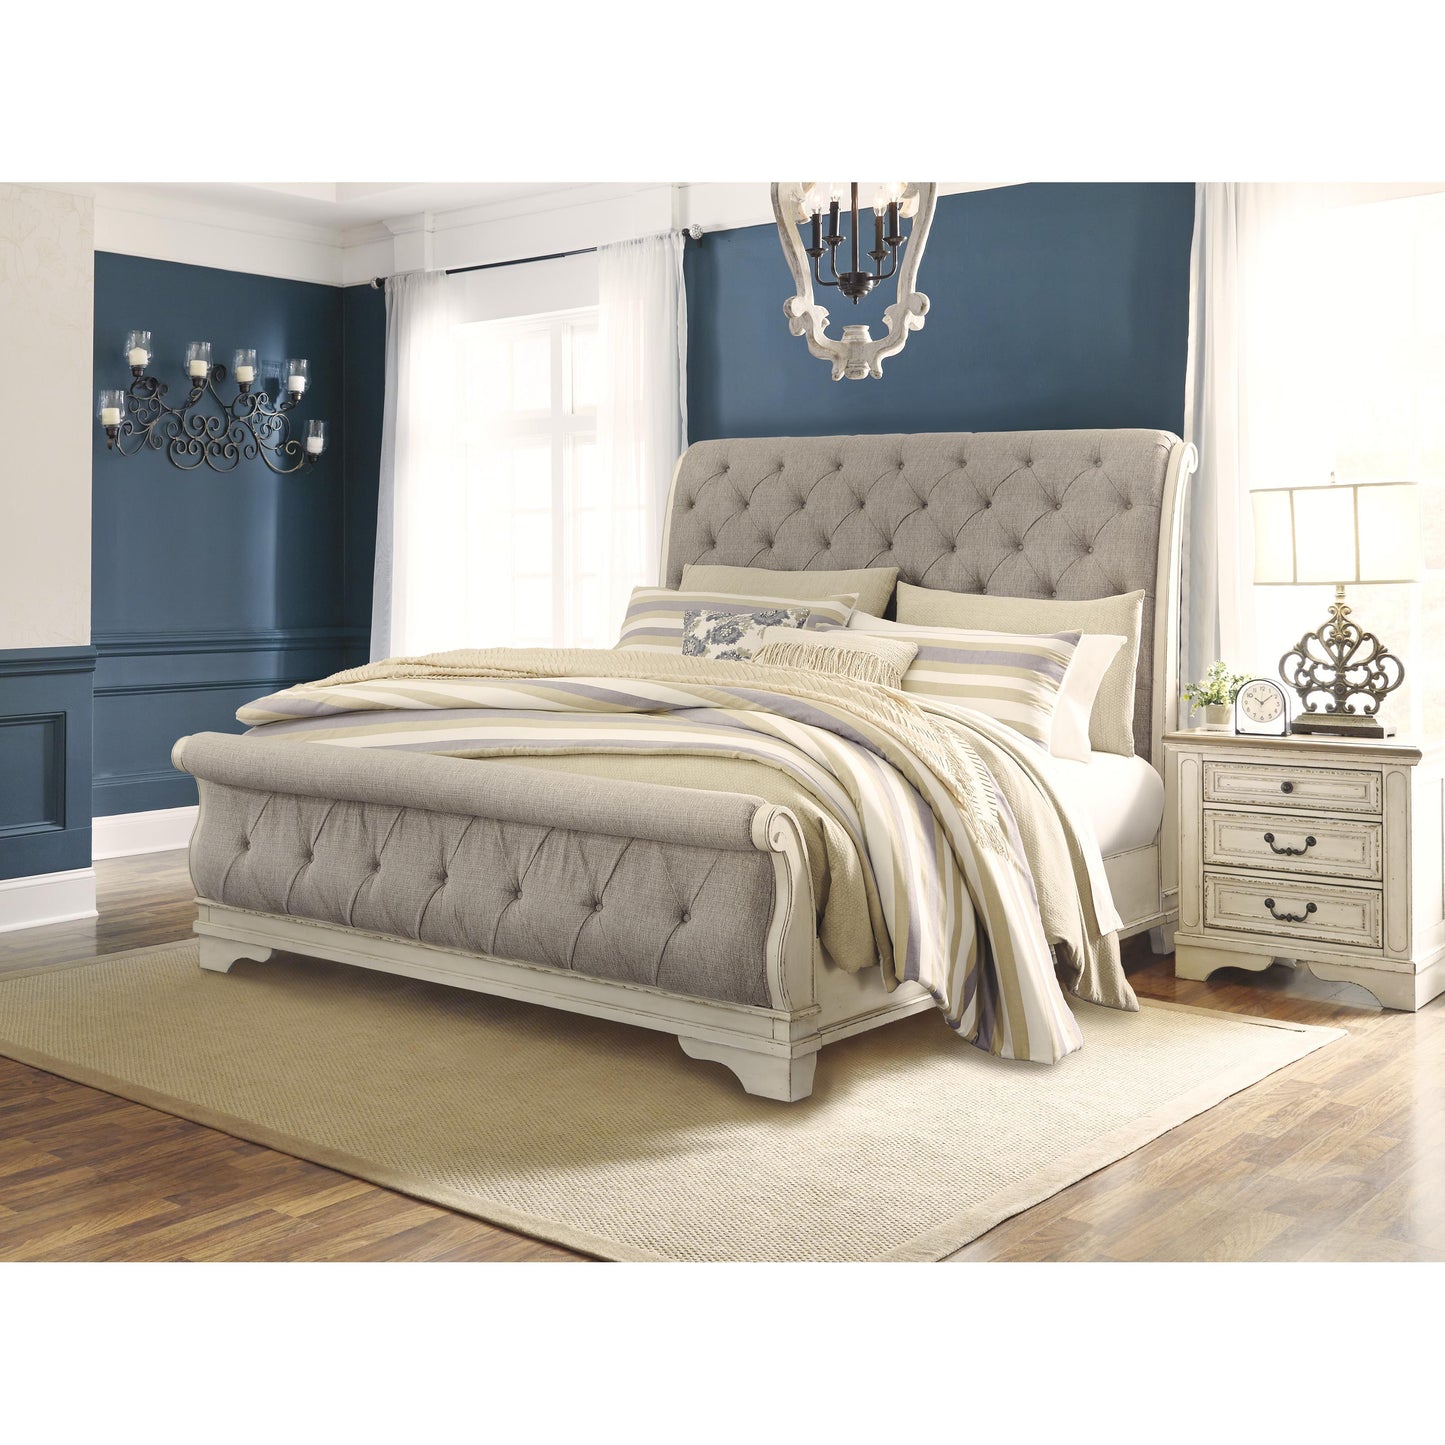 Signature Design by Ashley Realyn B743 5 pc Queen Sleigh Bedroom Set